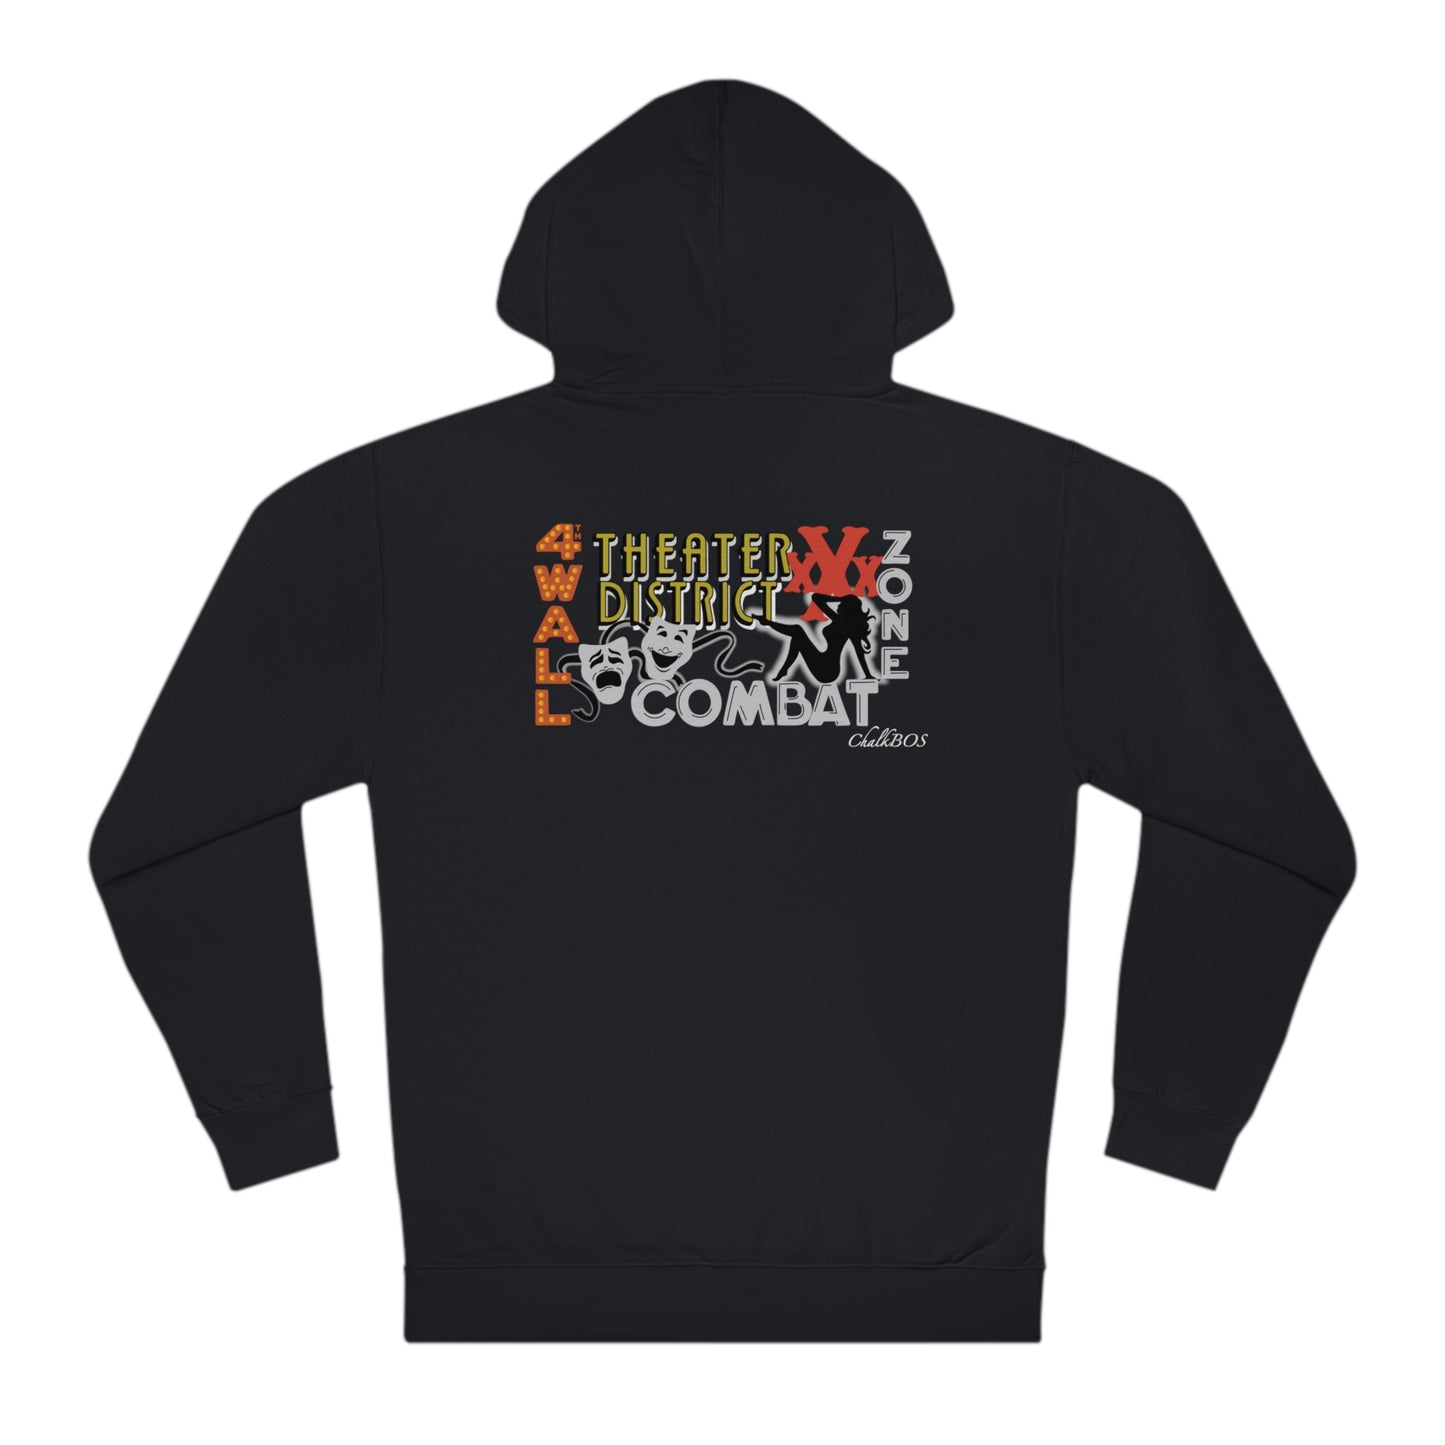 4th Wall Theater District Unisex Hooded Sweatshirt